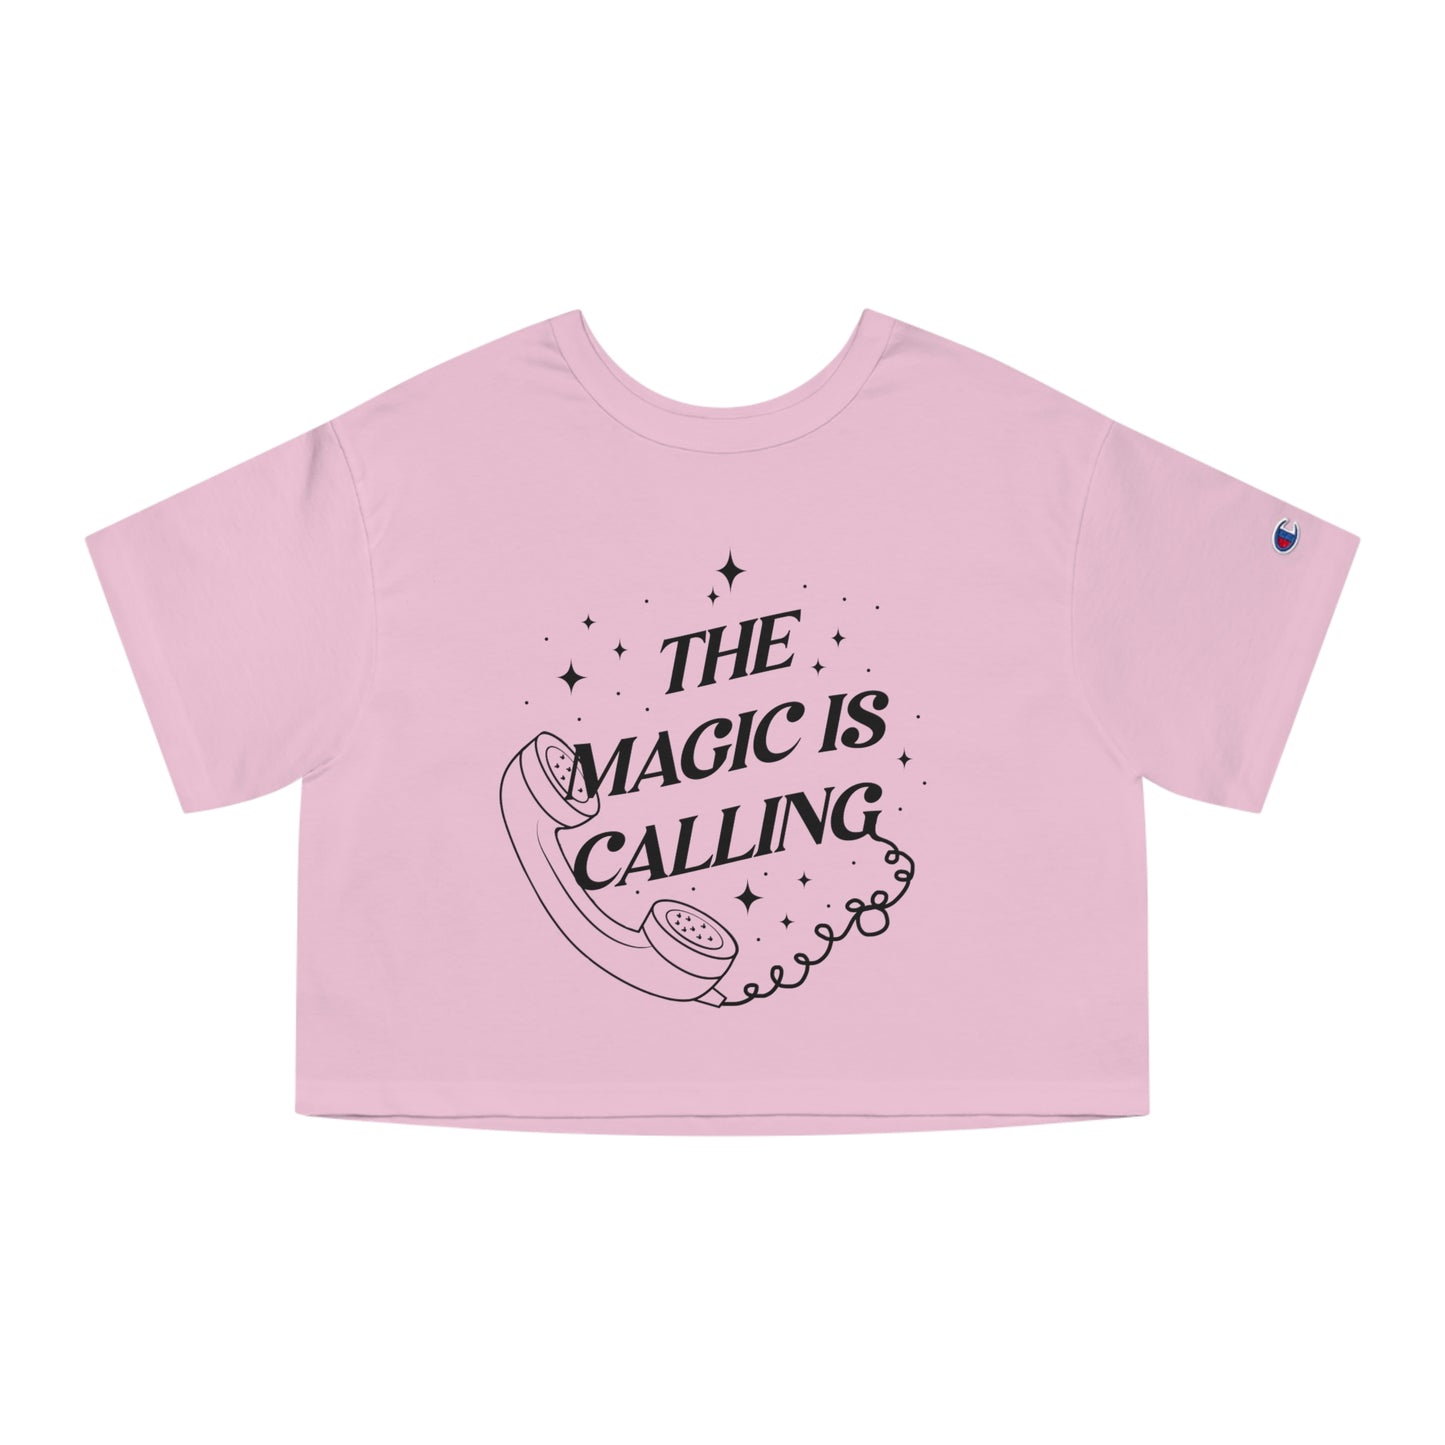 The Magic is Calling Double Sided - Adult Crop Top Shirt